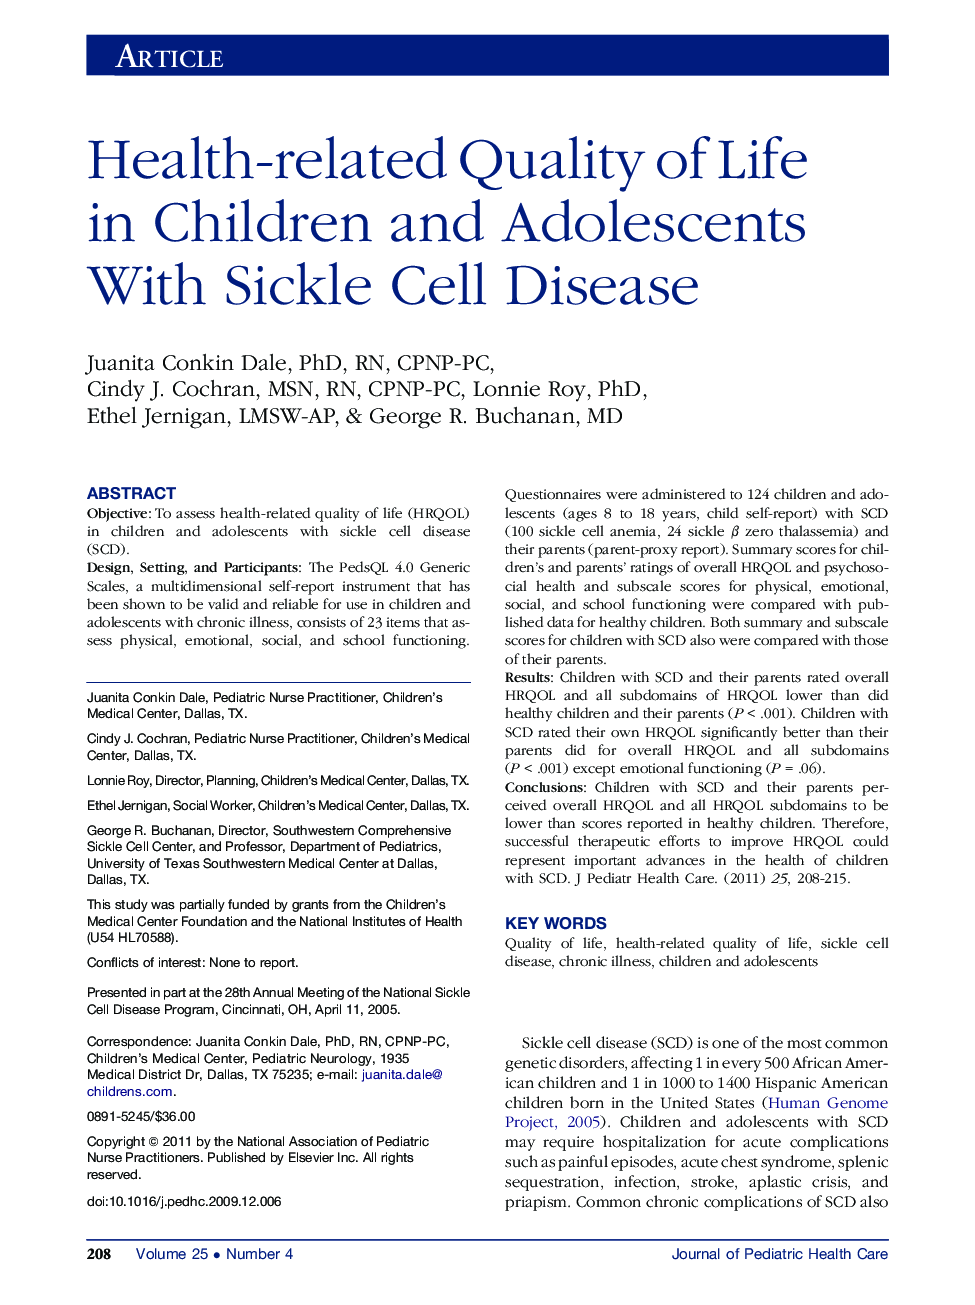 Health-related Quality of Life in Children and Adolescents With Sickle Cell Disease 